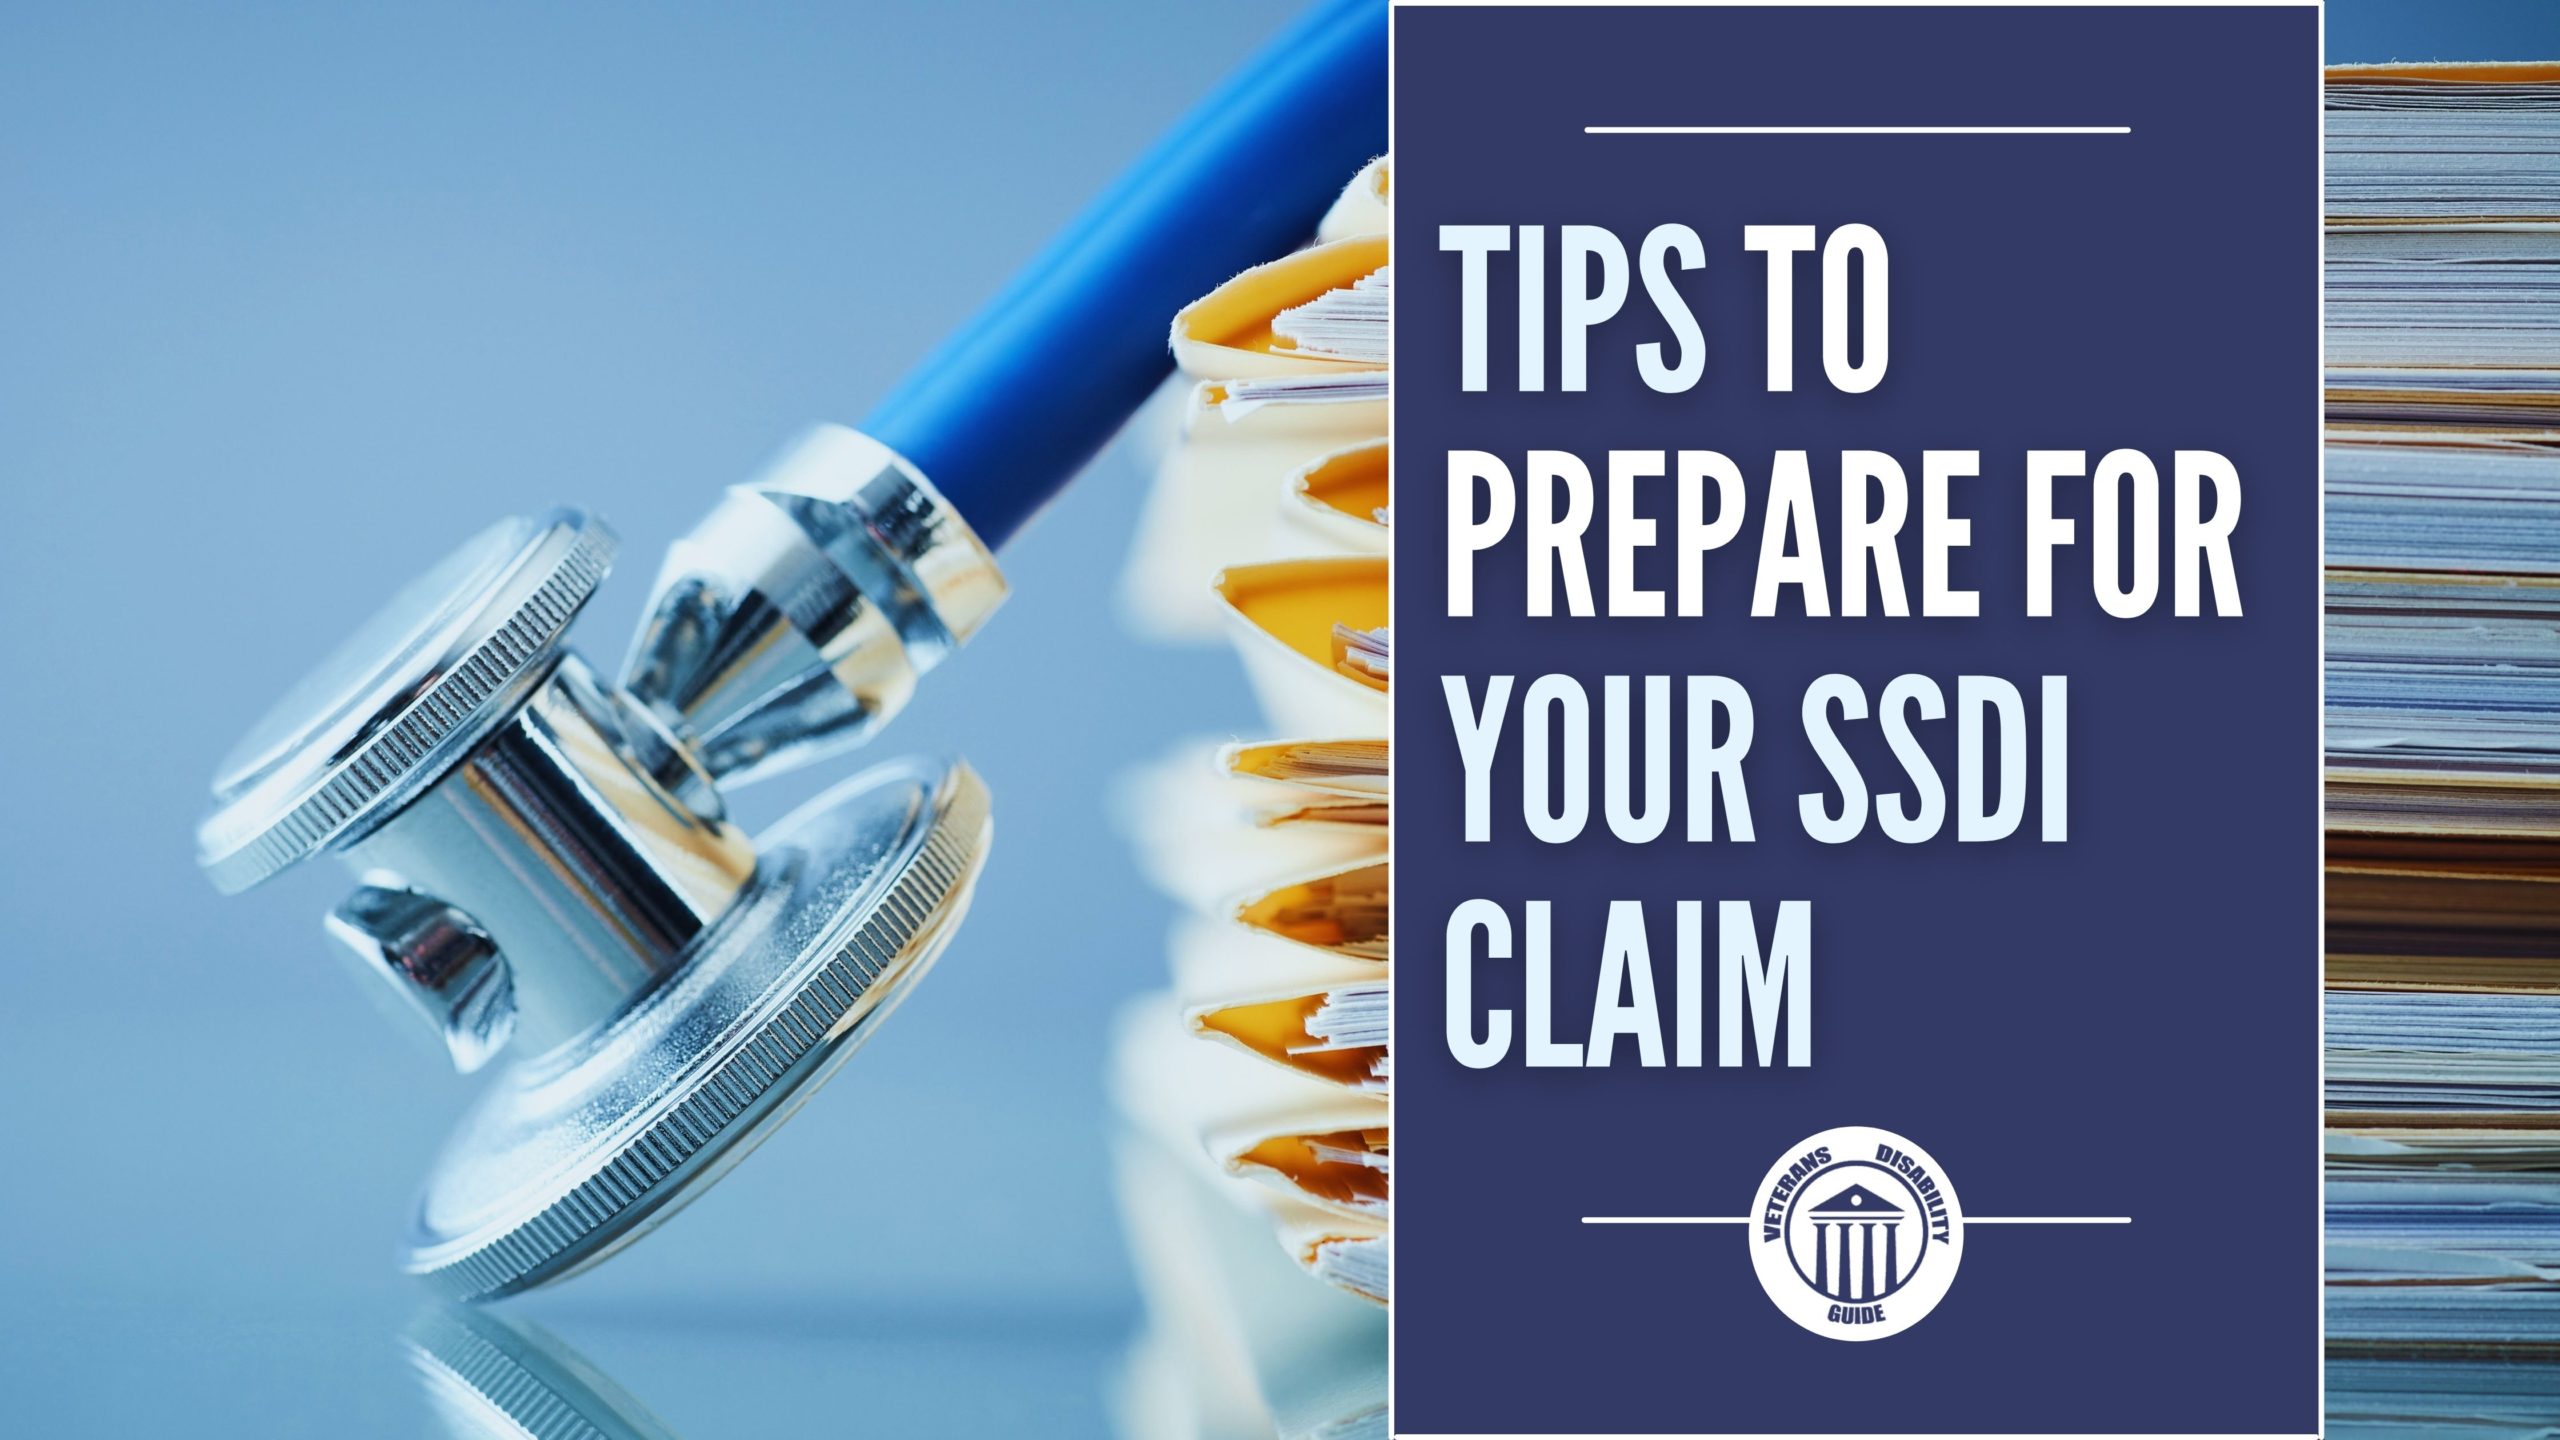 Tips To Prepare For Your SSDI Claim blog header image